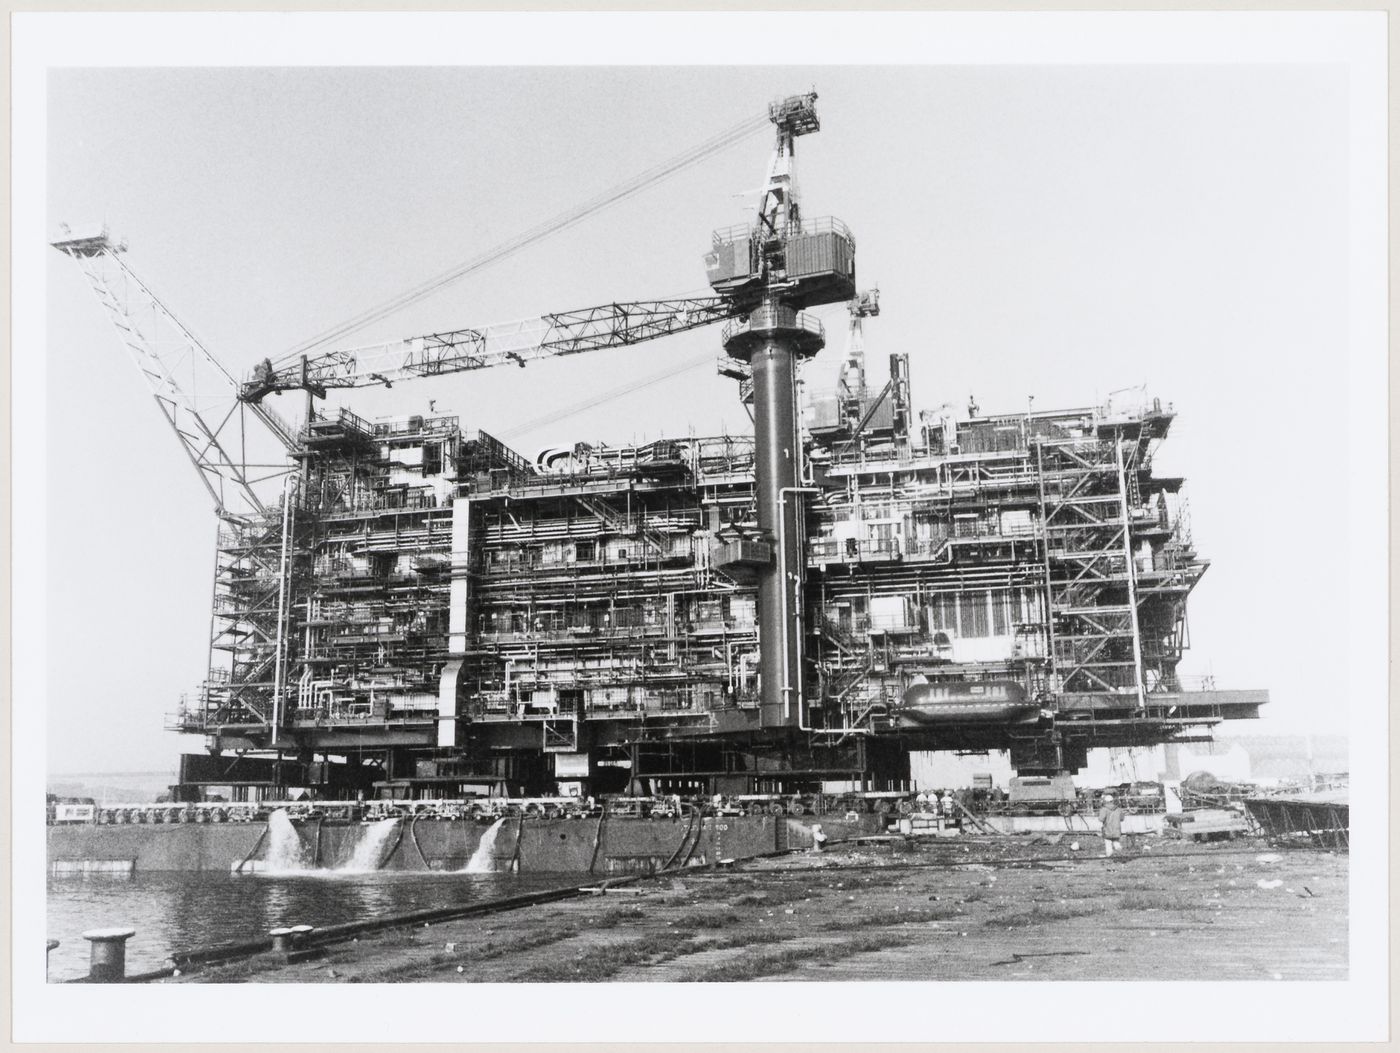 View of the Kittiwake offshore oil production deck at Howden Yard, Wallsend, England, where it was loaded onto a vessel from land by Press Offshore